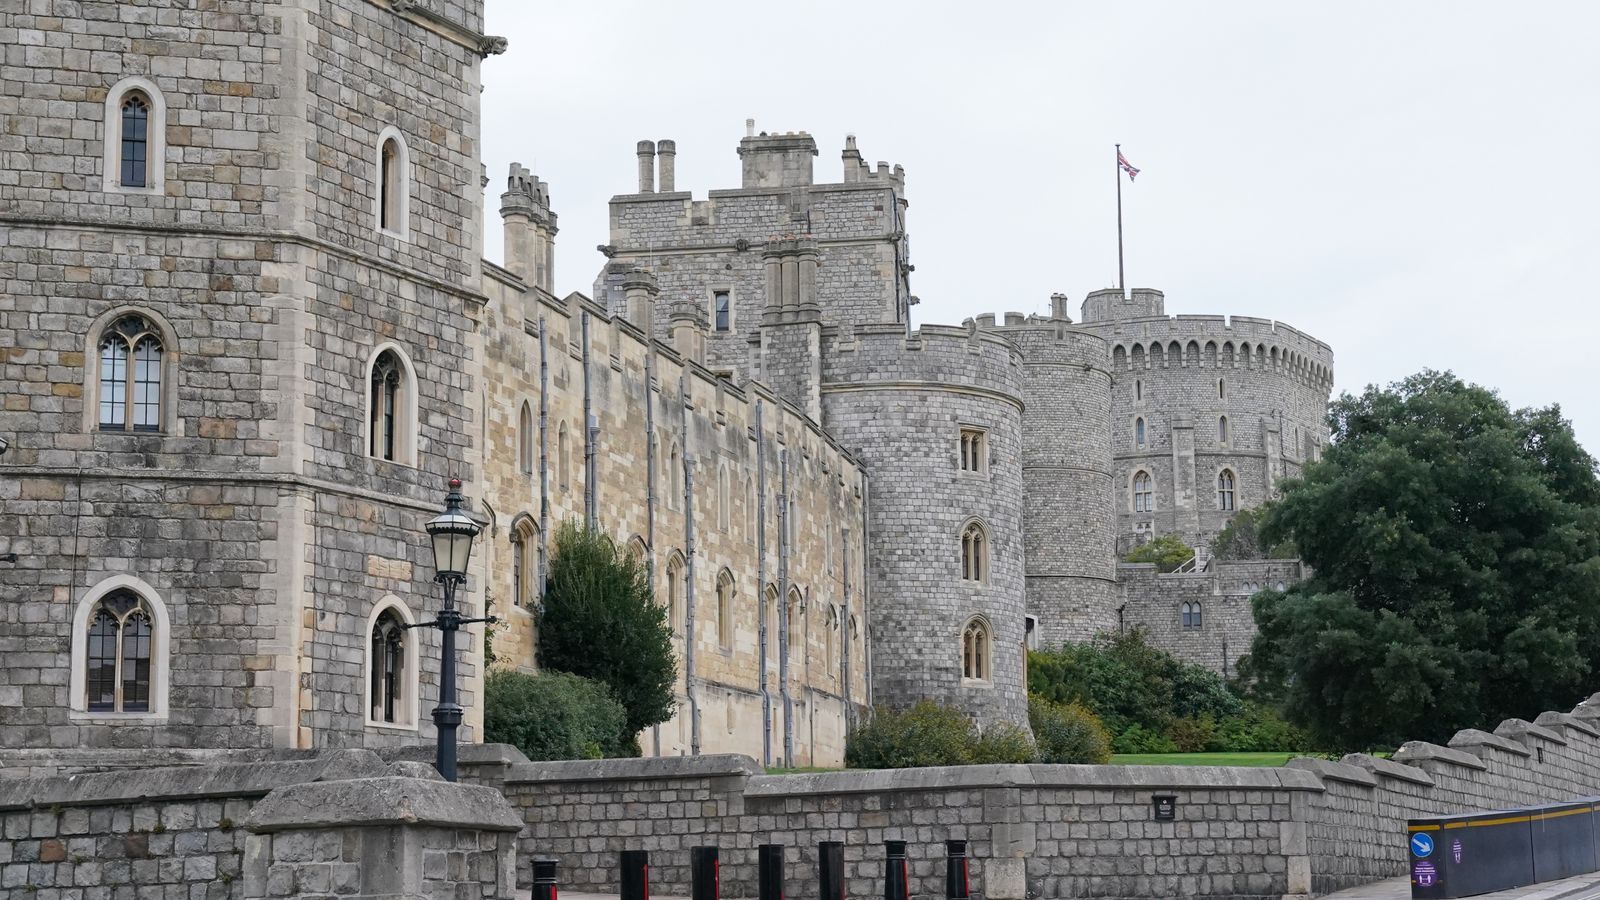 Windsor Castle to reopen to public for first time since Queen's death